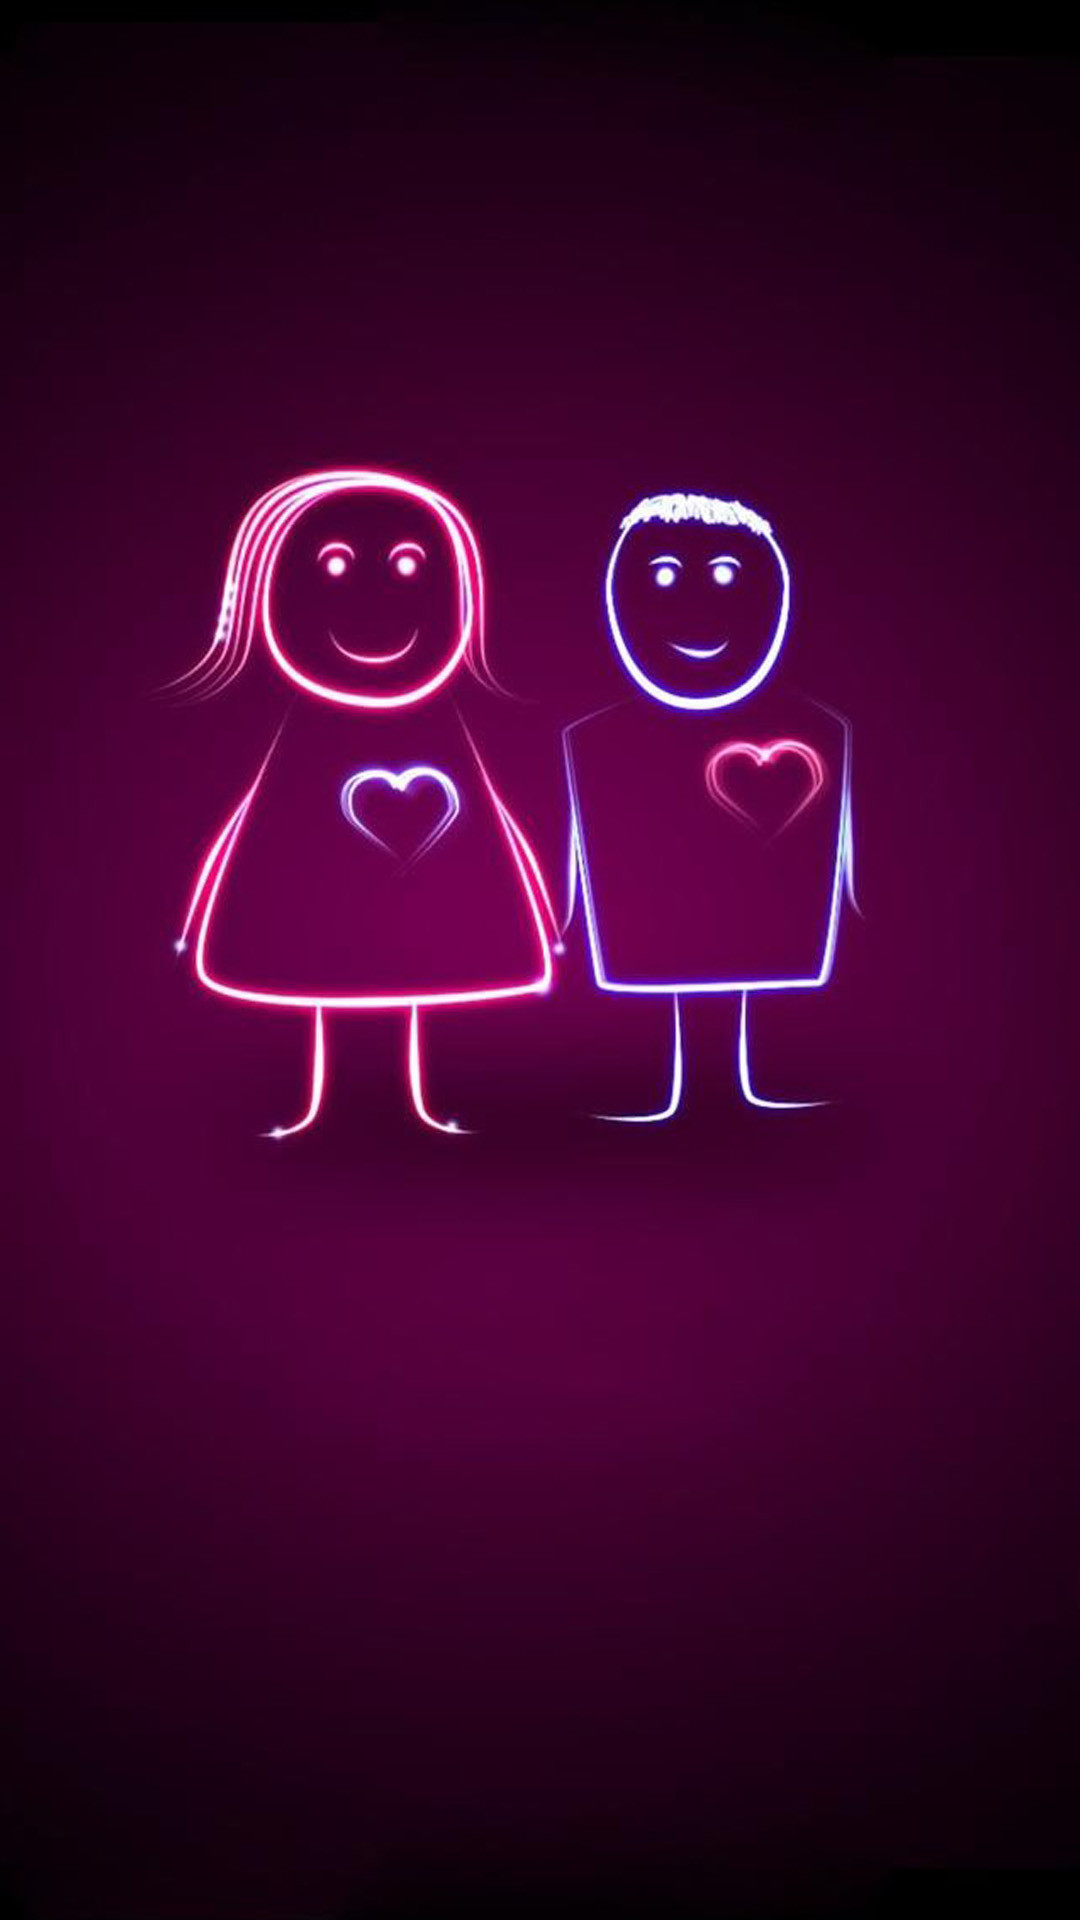 1080x1920 Heartbeat Lover Couple iPhone 8 wallpaper